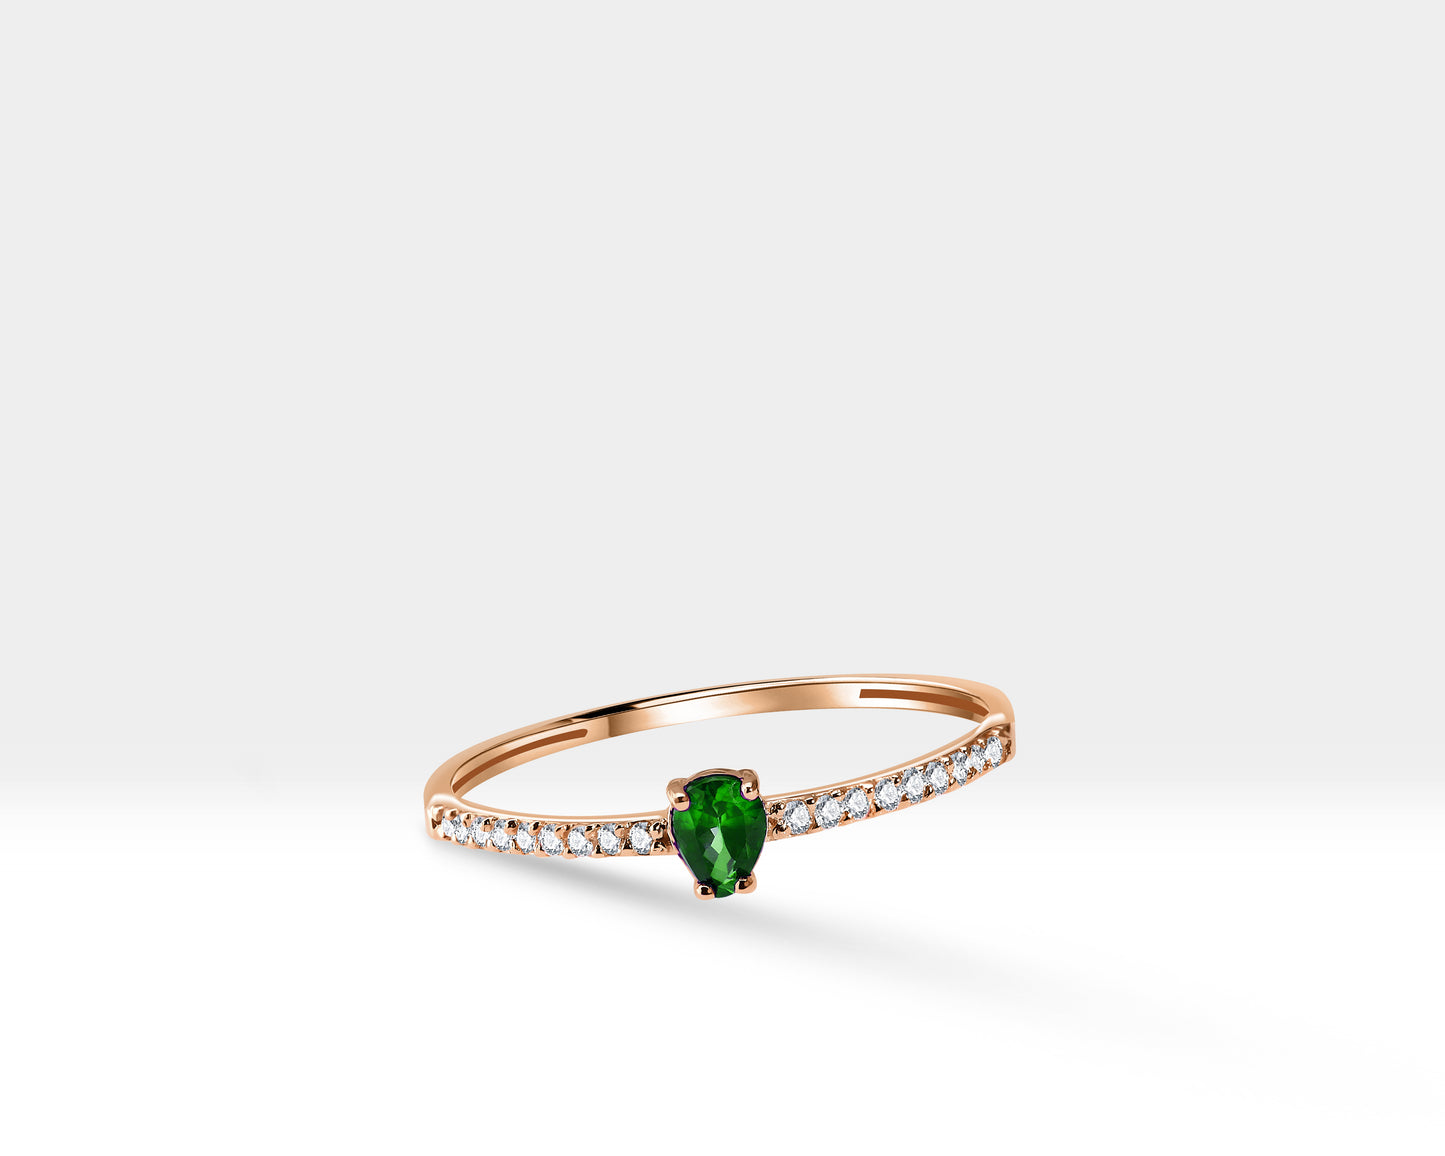 14K Yellow Gold Ring,Straight Shank Engagement Ring,Pear Cut Emerald with Half Eternity